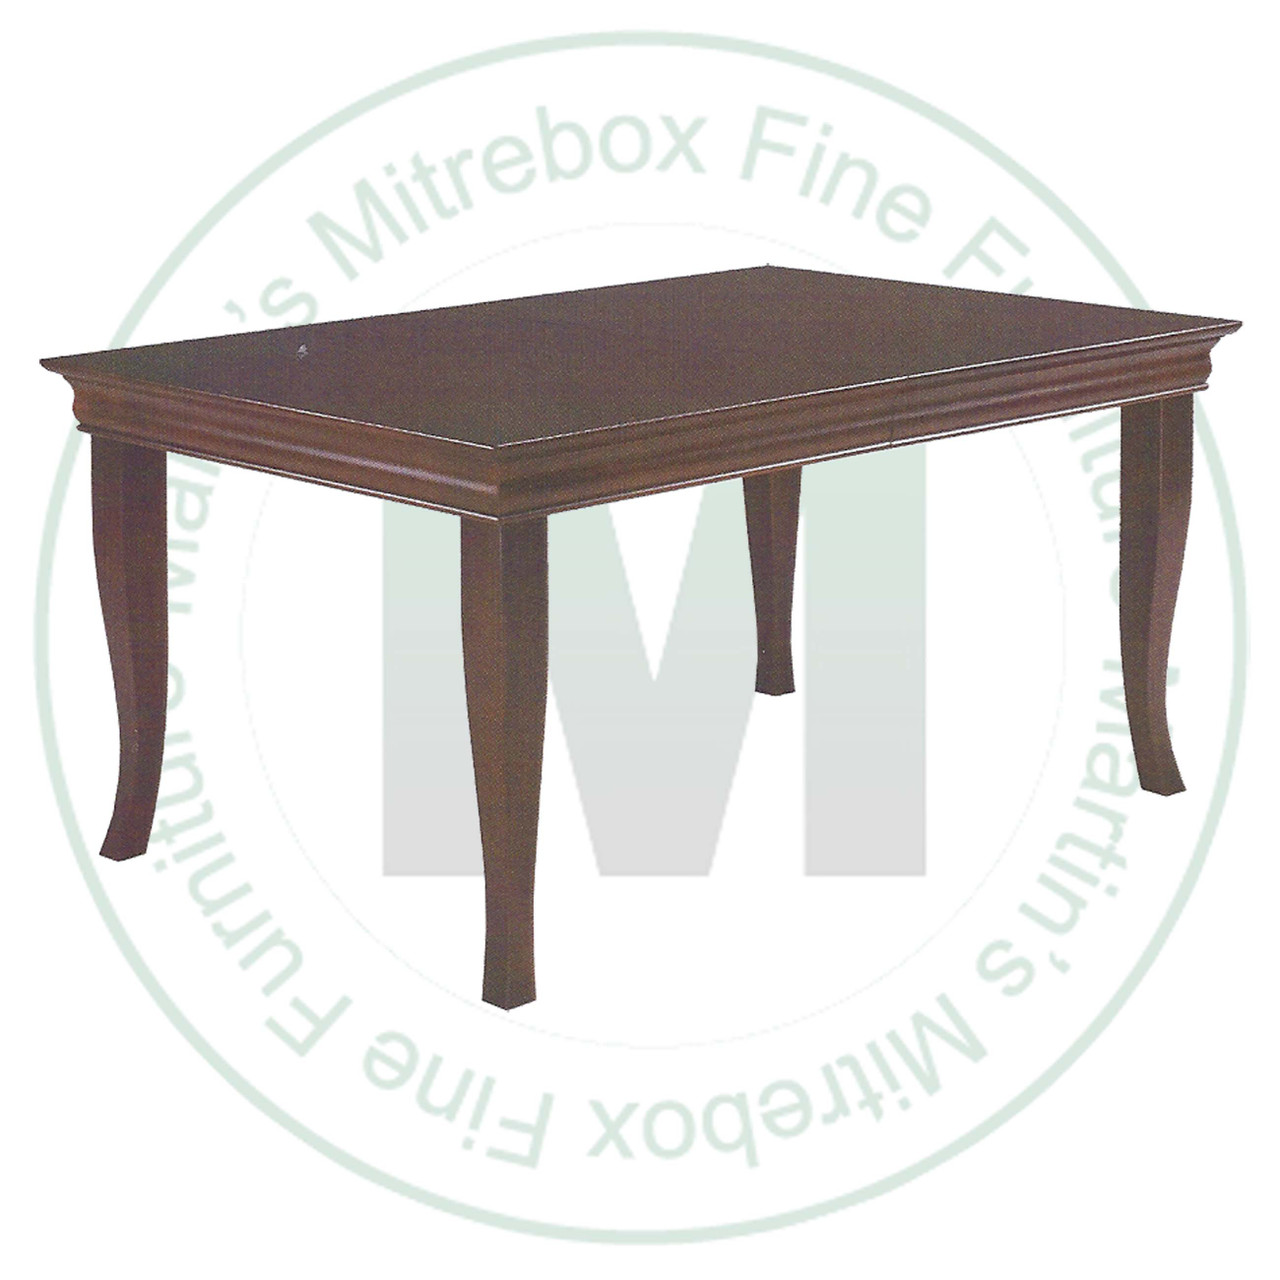 Oak French Riviera Extension Harvest Table 42''D x 48''W x 30''H With 3 - 12'' Leaves